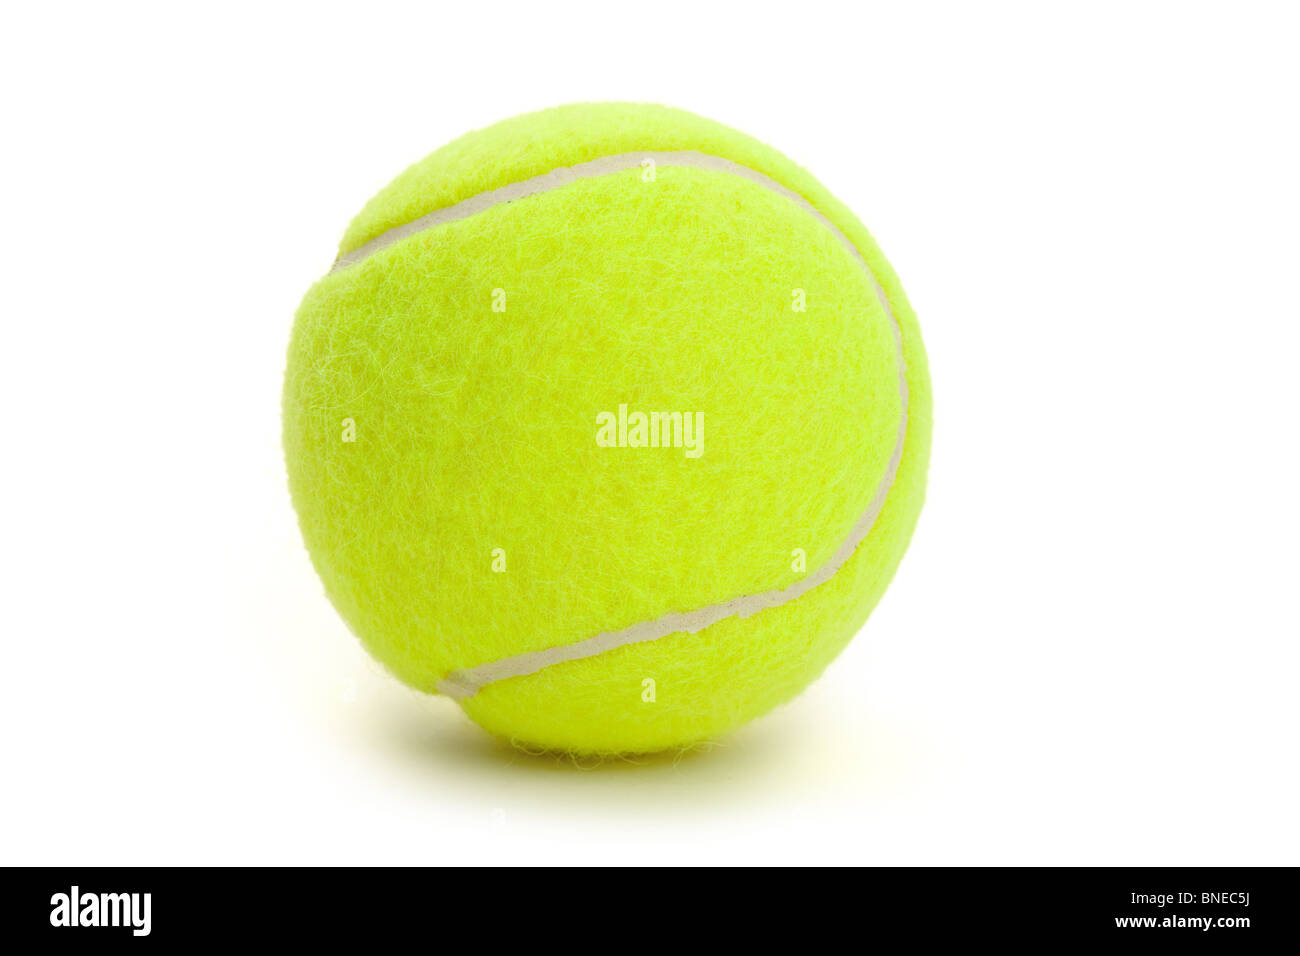 Tennis Ball with white background Stock Photo